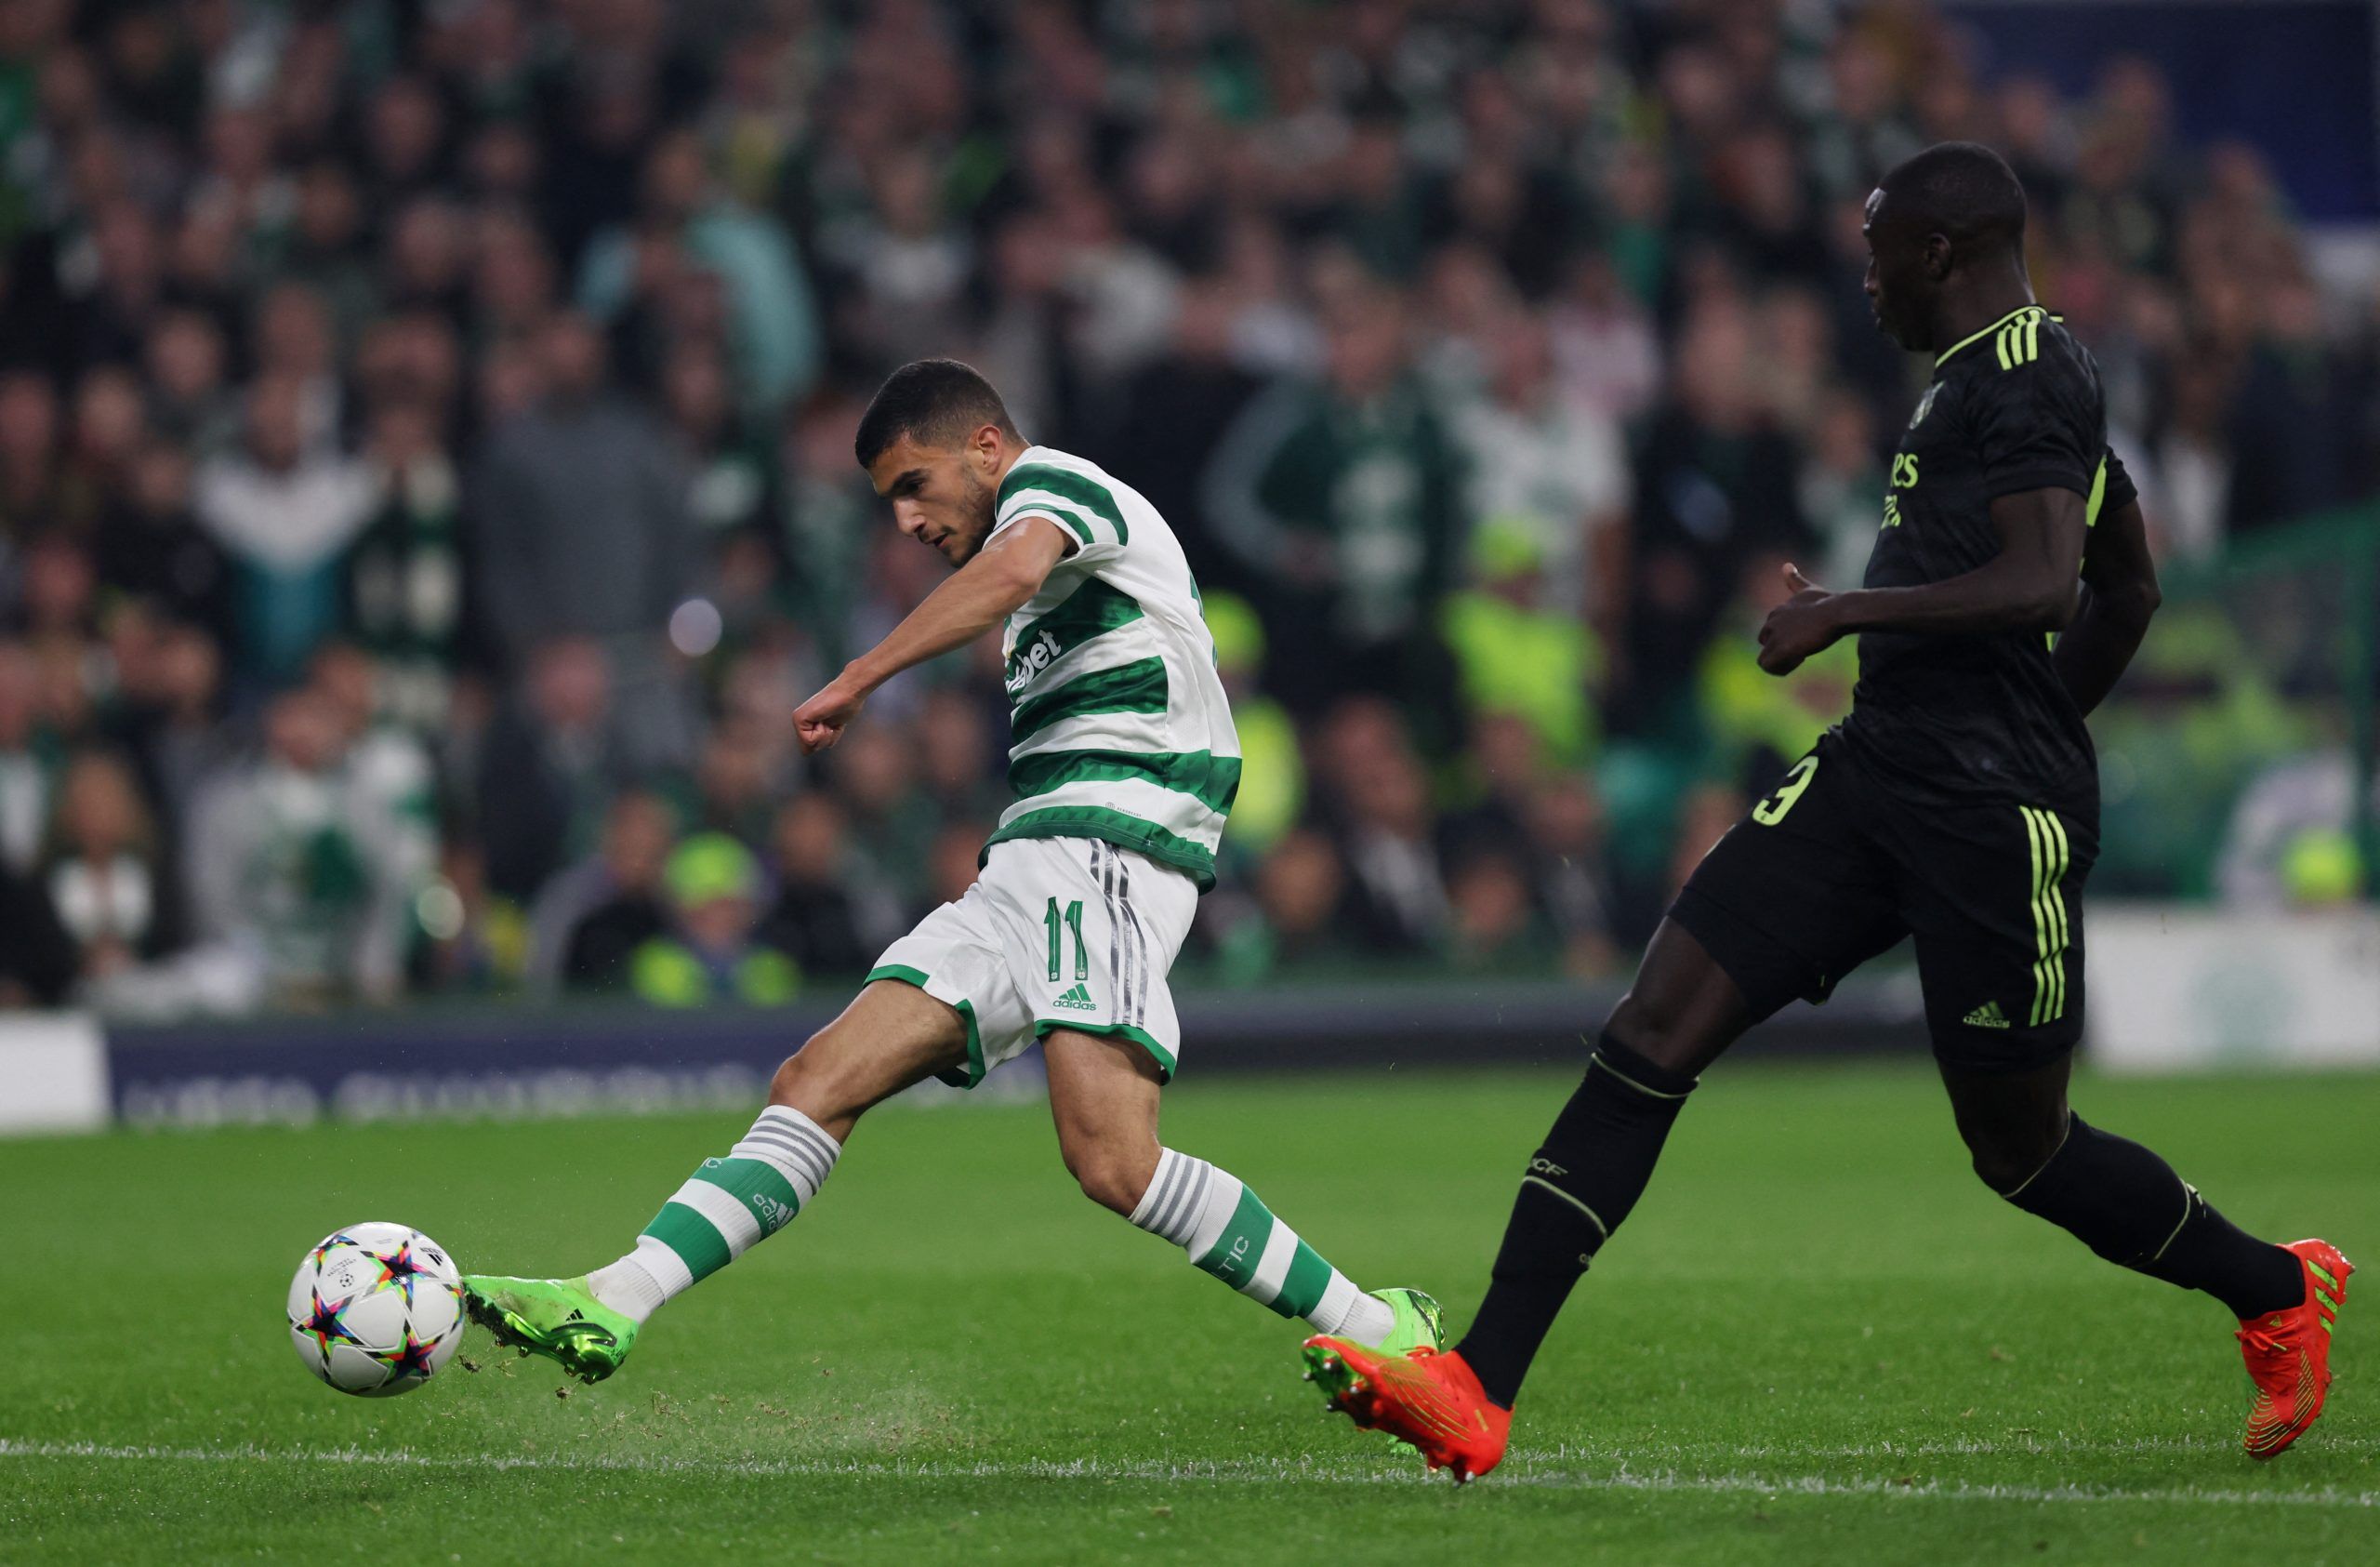 Celtic: Alex McLeish reacts to reported Liel Abada price tag -Celtic News